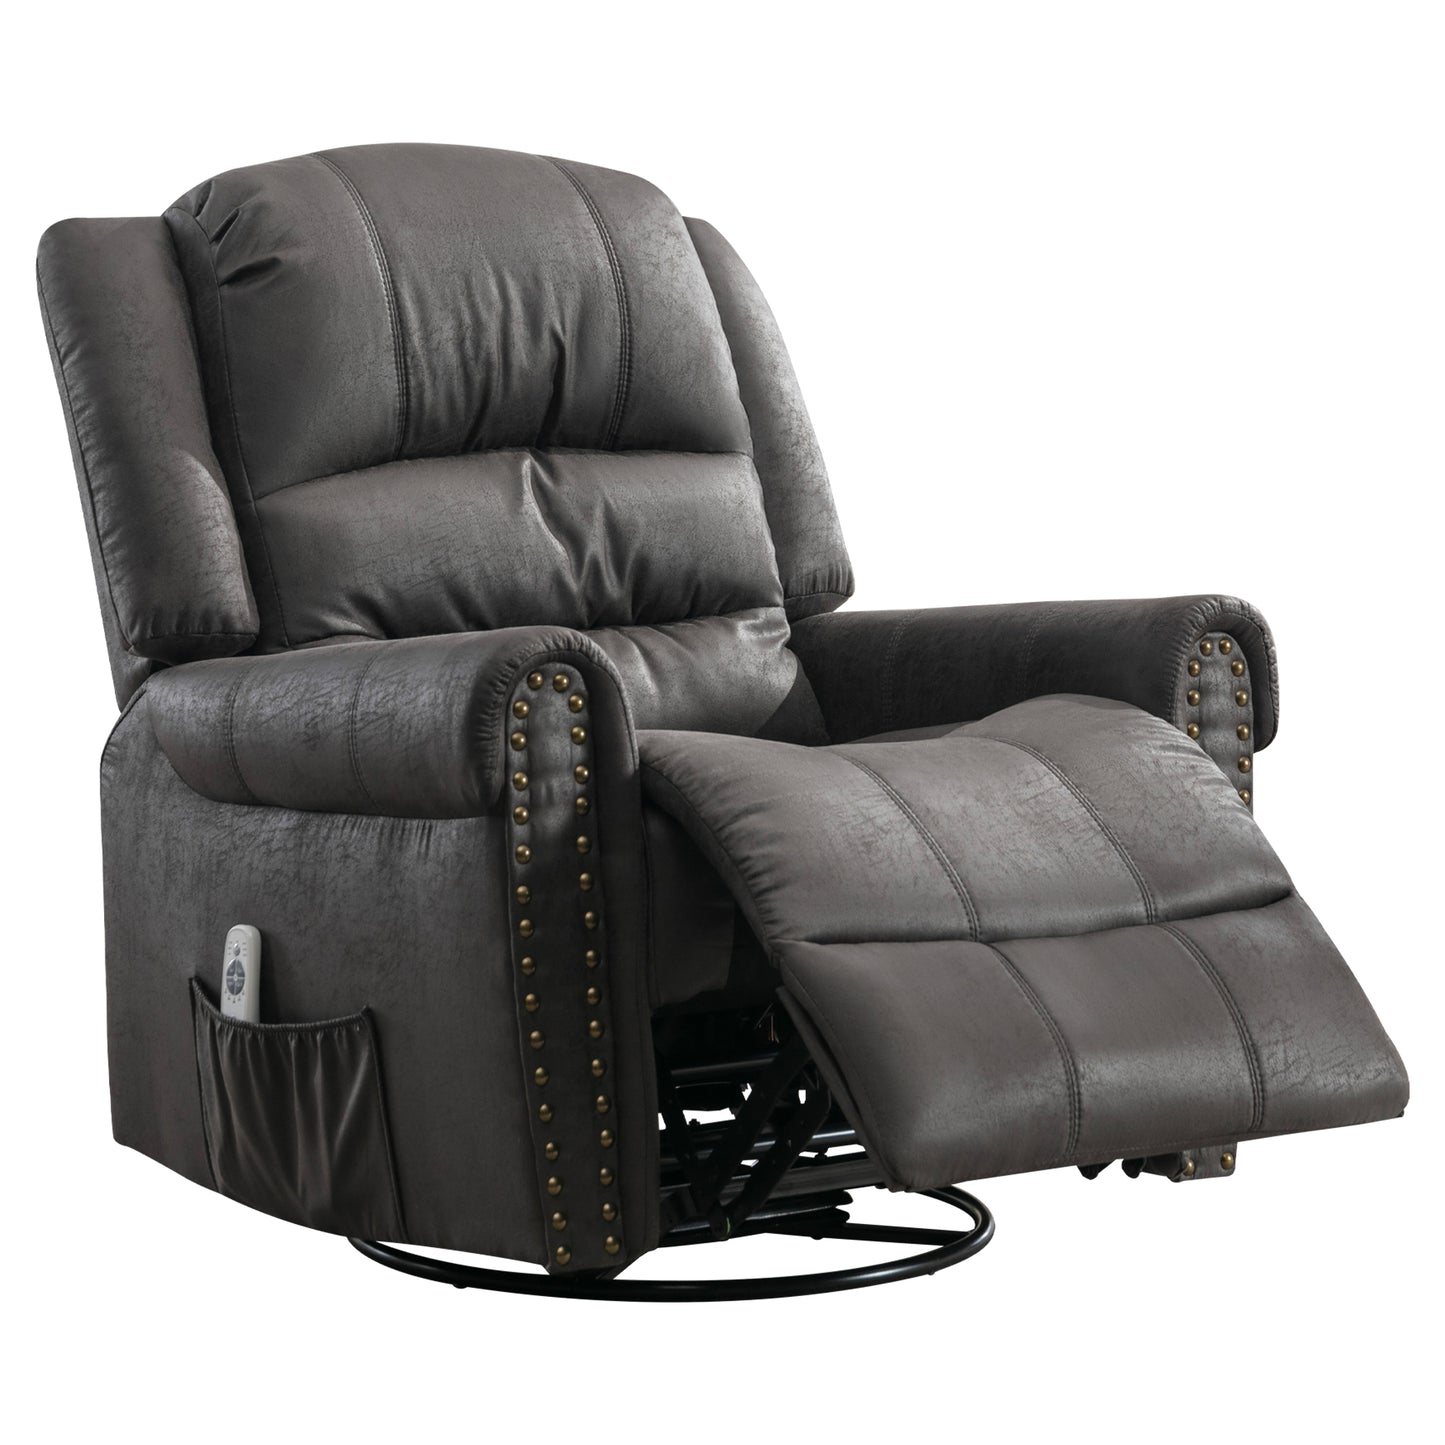 SYNGAR Swivel Rocker Recliner Chair for Living Room, Manual Reclining Chair Oversized with Heat and Massage Function, USB, Soft Fabric Rocking Sofa Glider Chair for Bedroom Home Theater, Gray